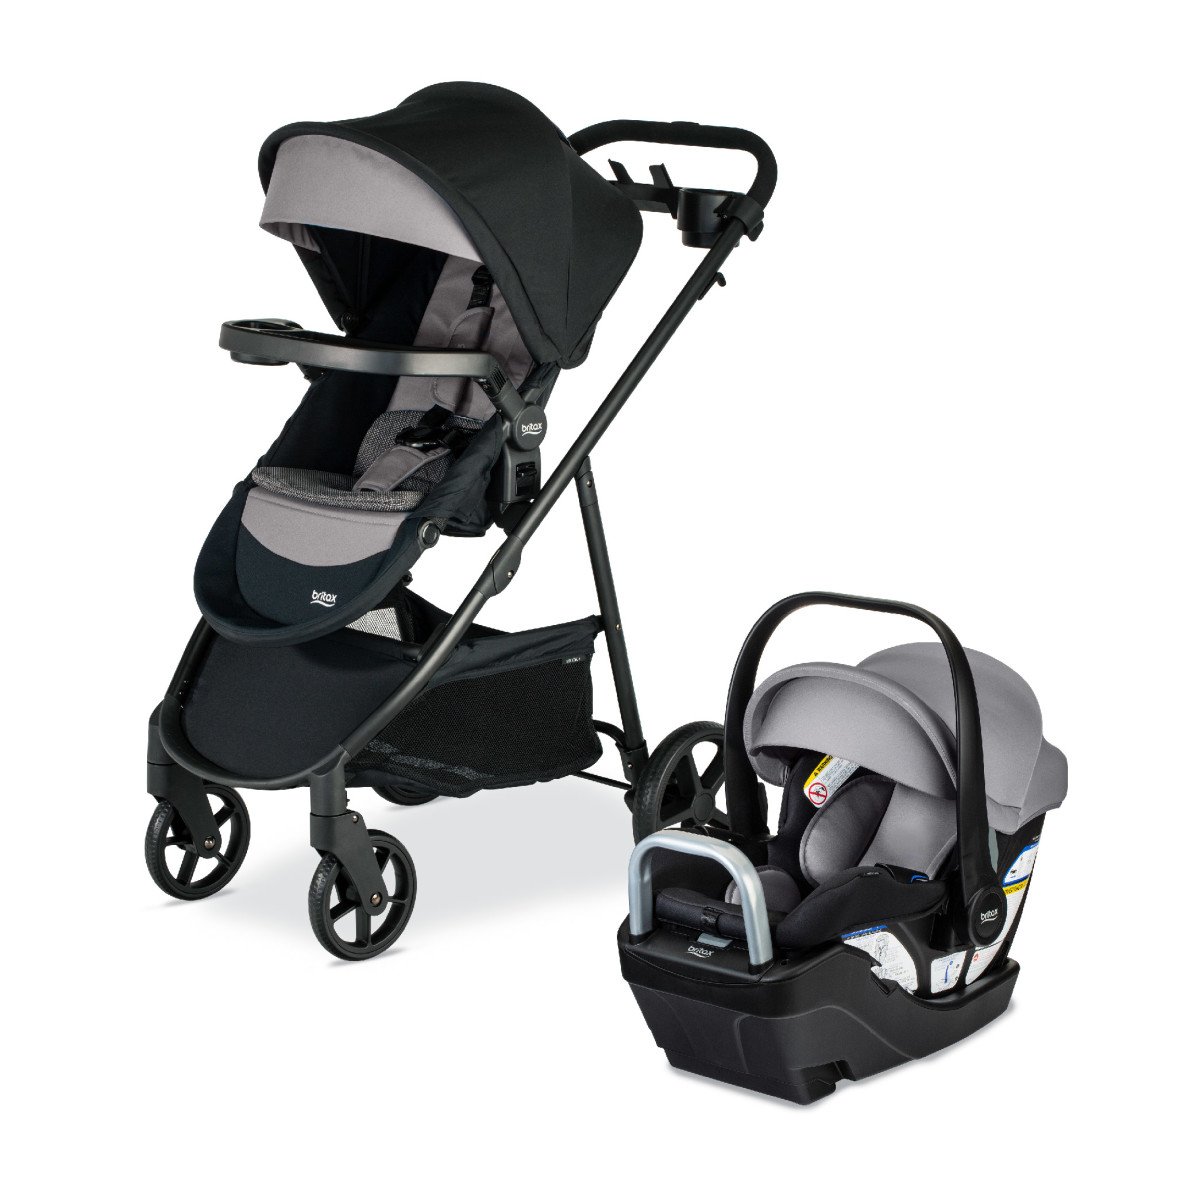 Left Facing view of the Willow S Infant Car Seat and Brook+ Stroller (Copy)